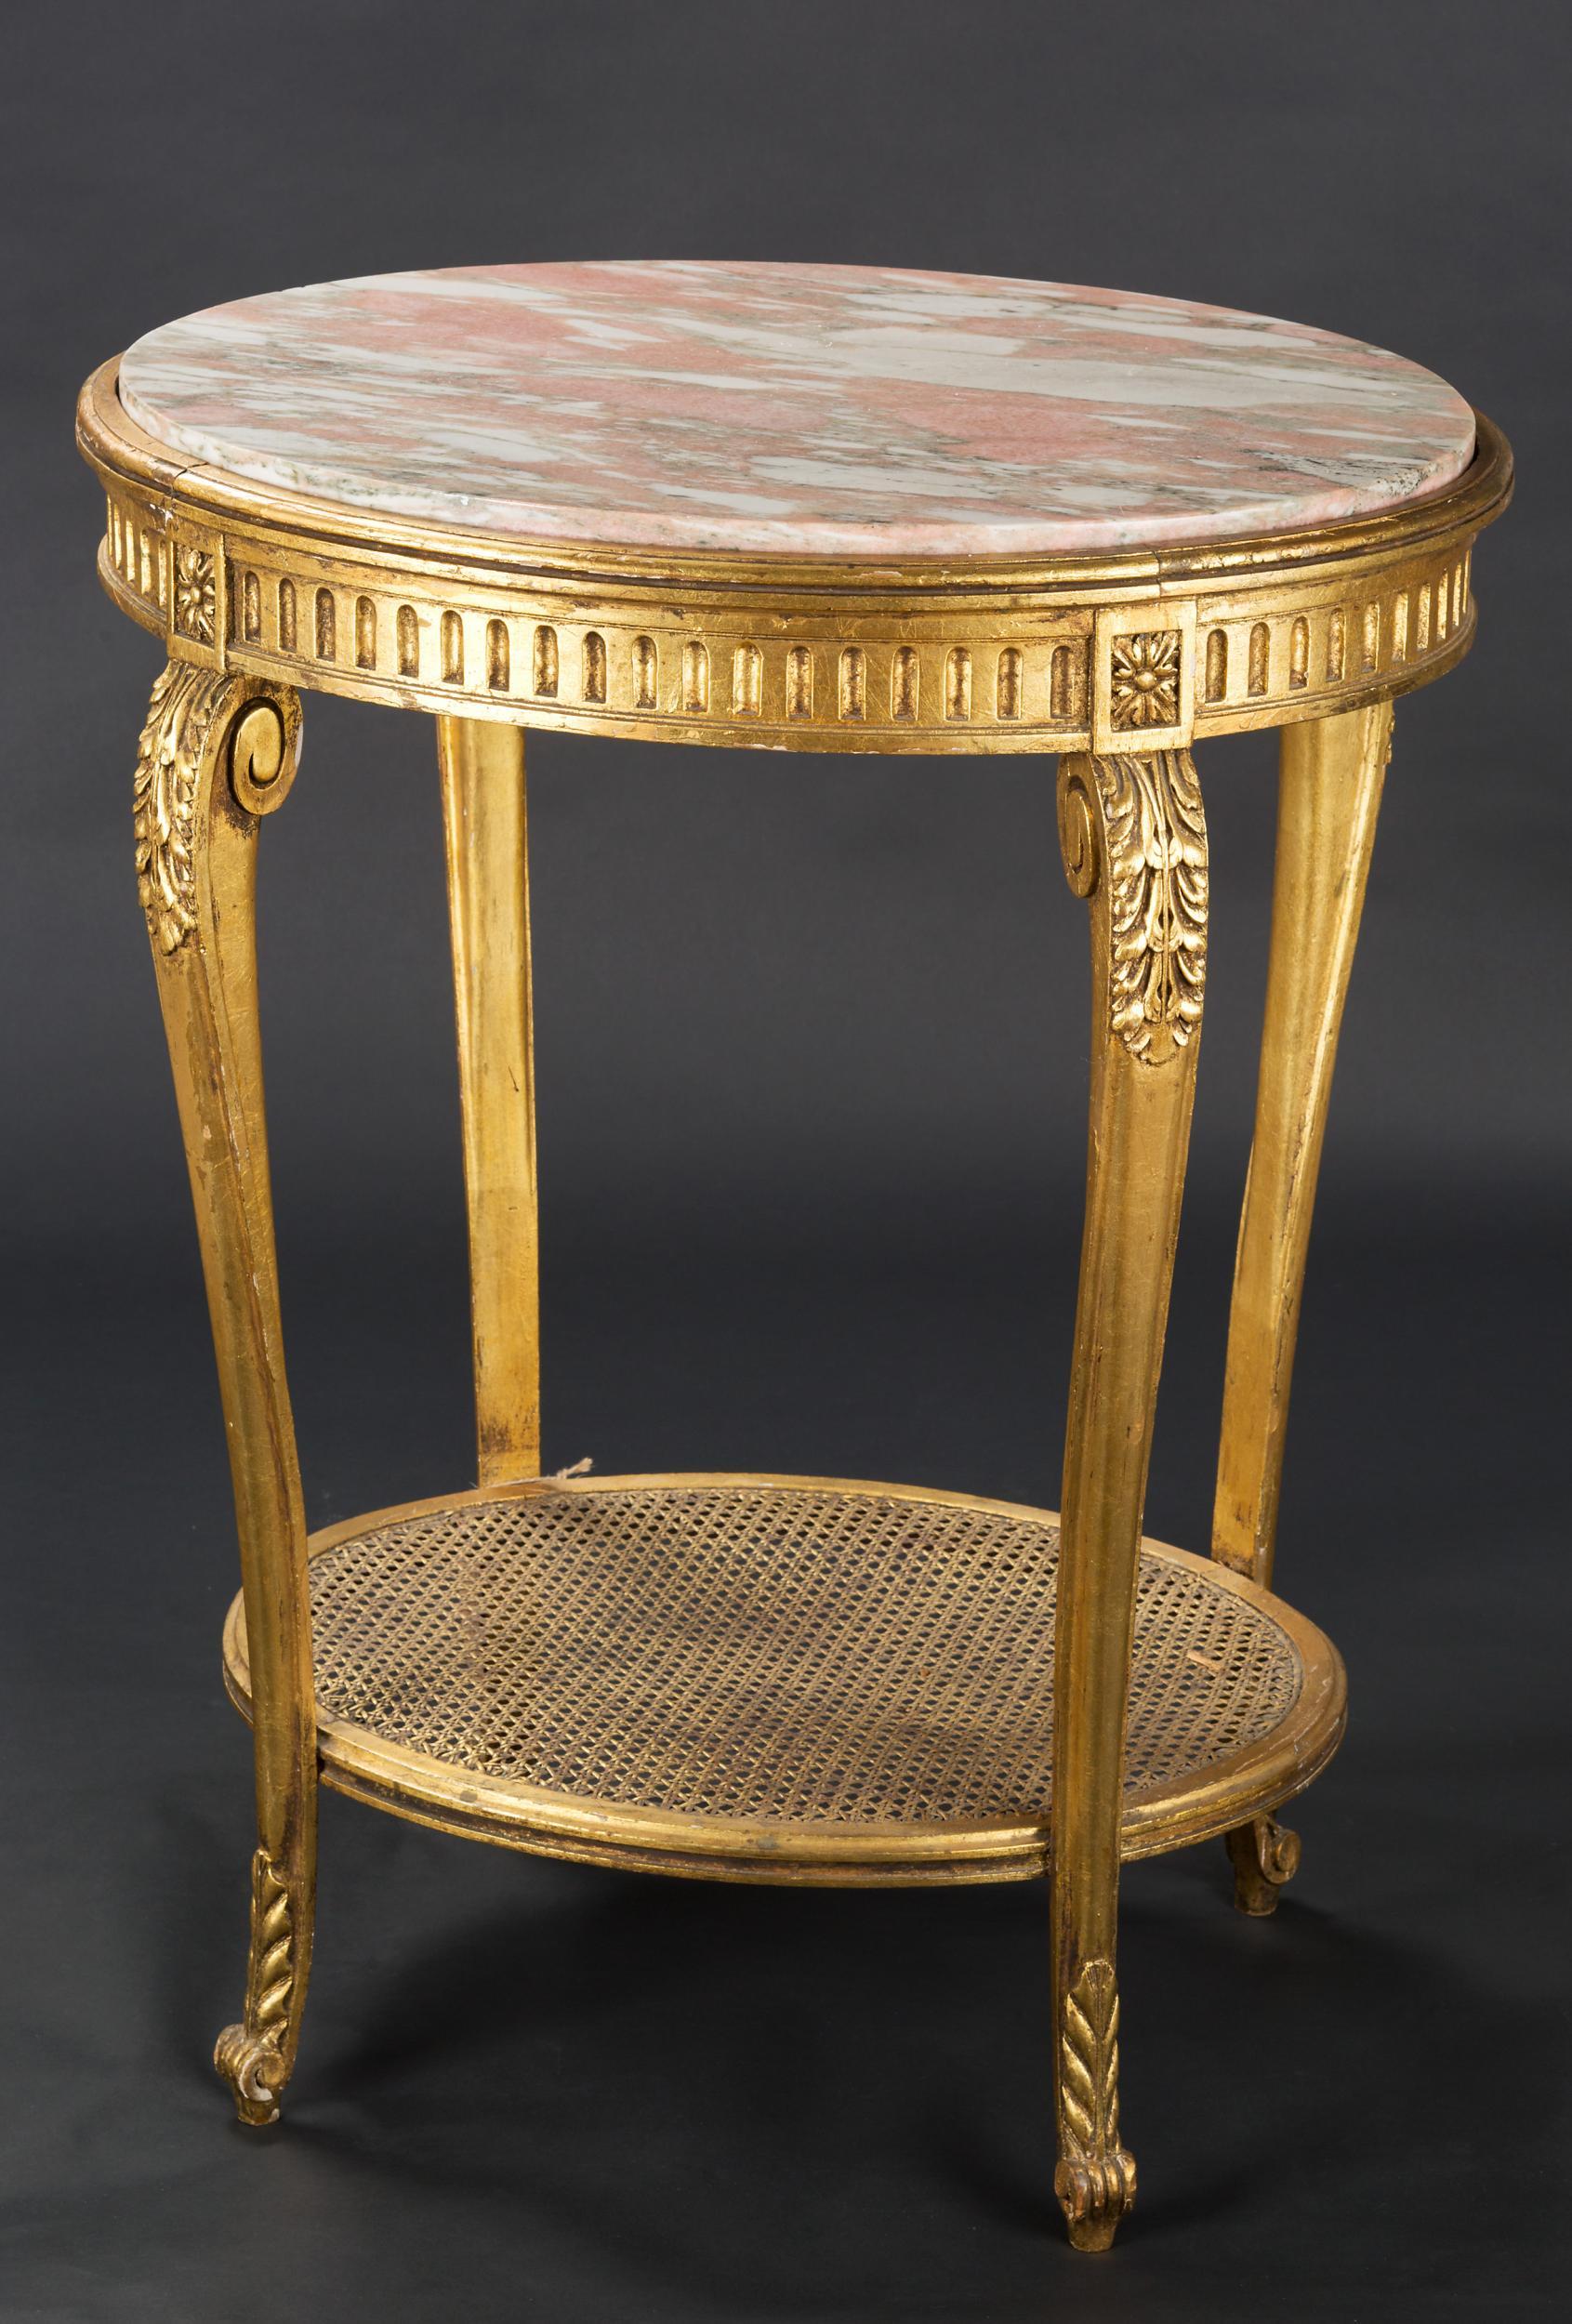 French gilt marble side table with dentil moulding, carved outswept legs and rose marble oval top, c.1870